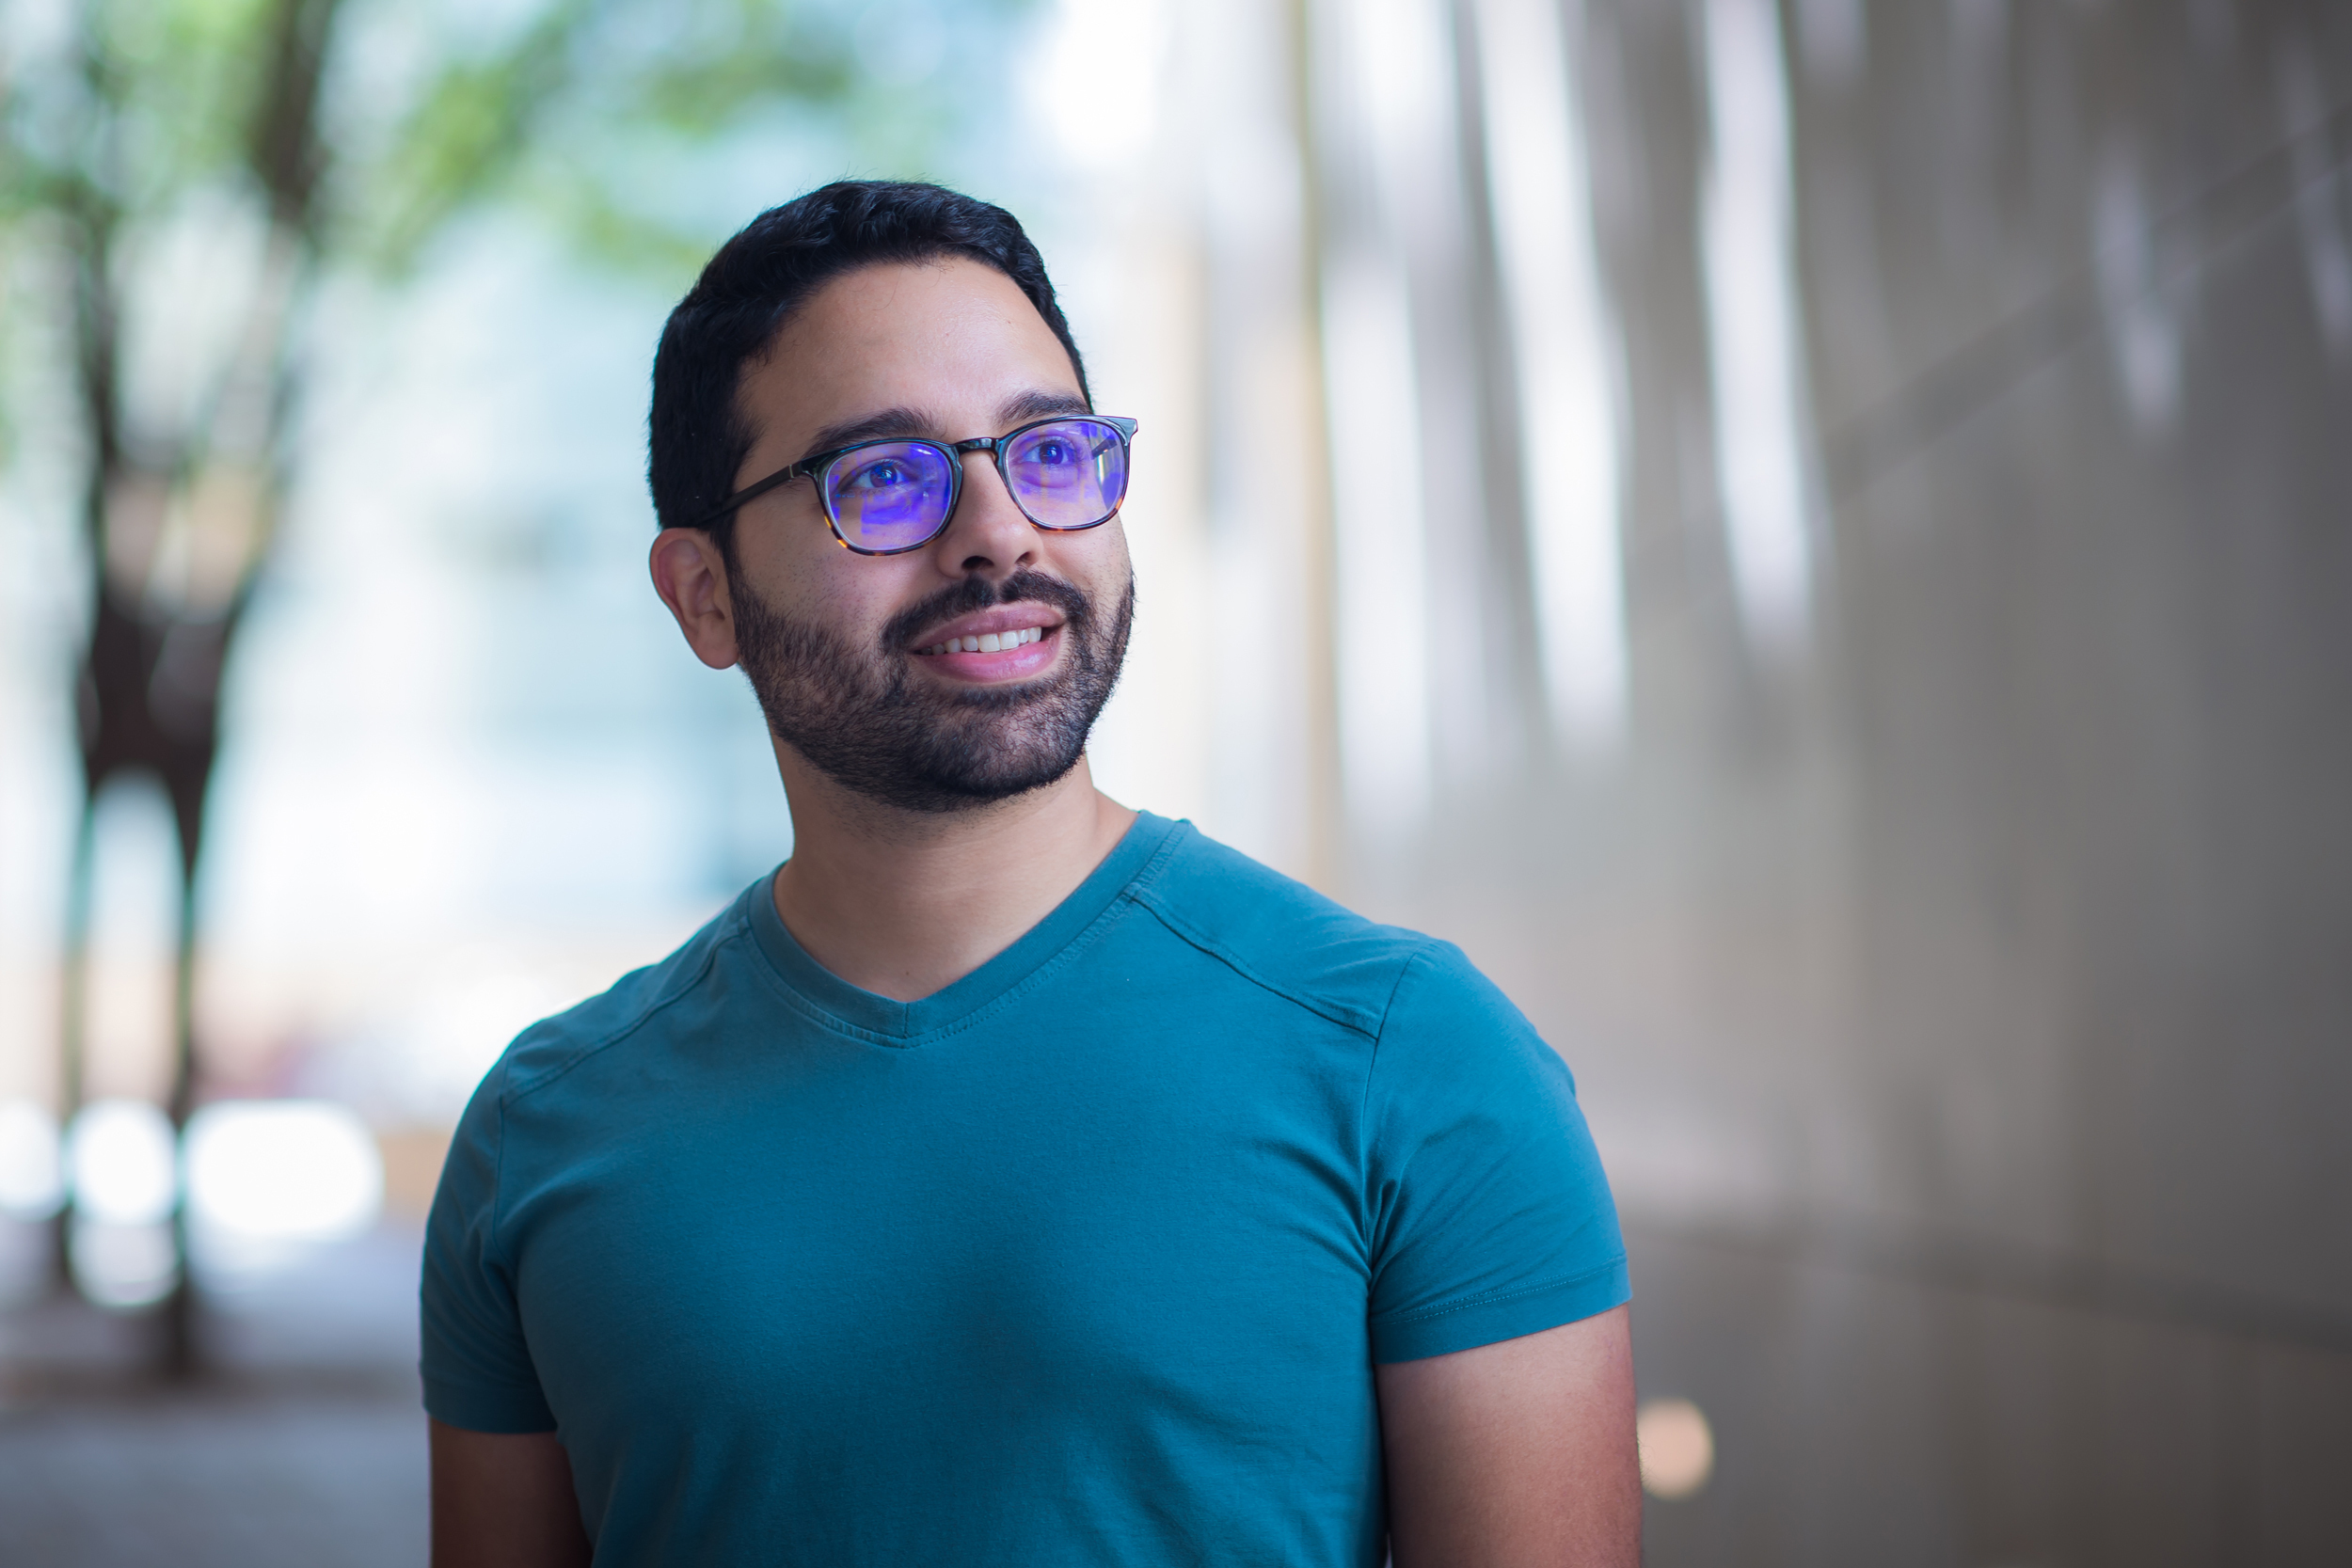 Raúl Mojica Soto-Albors, a doctoral student in the Department of Brain and Cognitive Sciences, uses a complex electrophysiology method termed “patch clamp” to investigate neuronal activity in vivo.